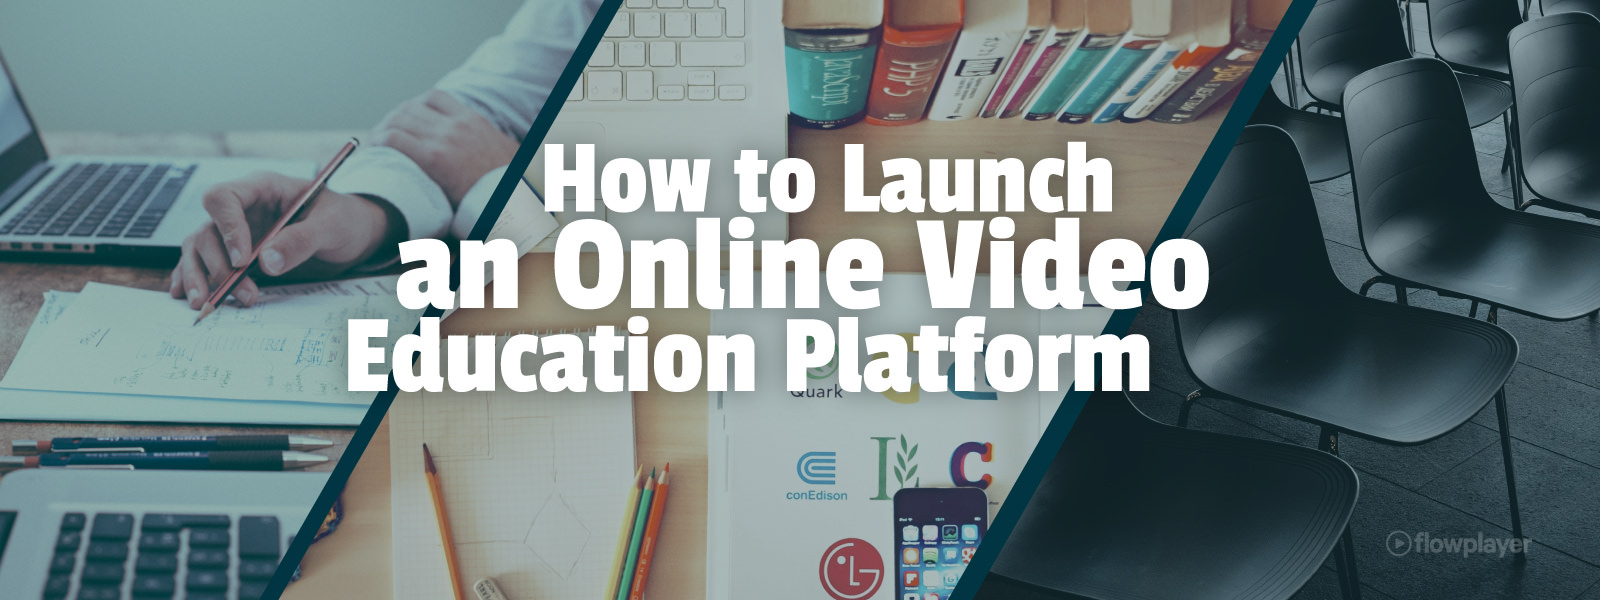 How to Launch an Online Video Education Platform